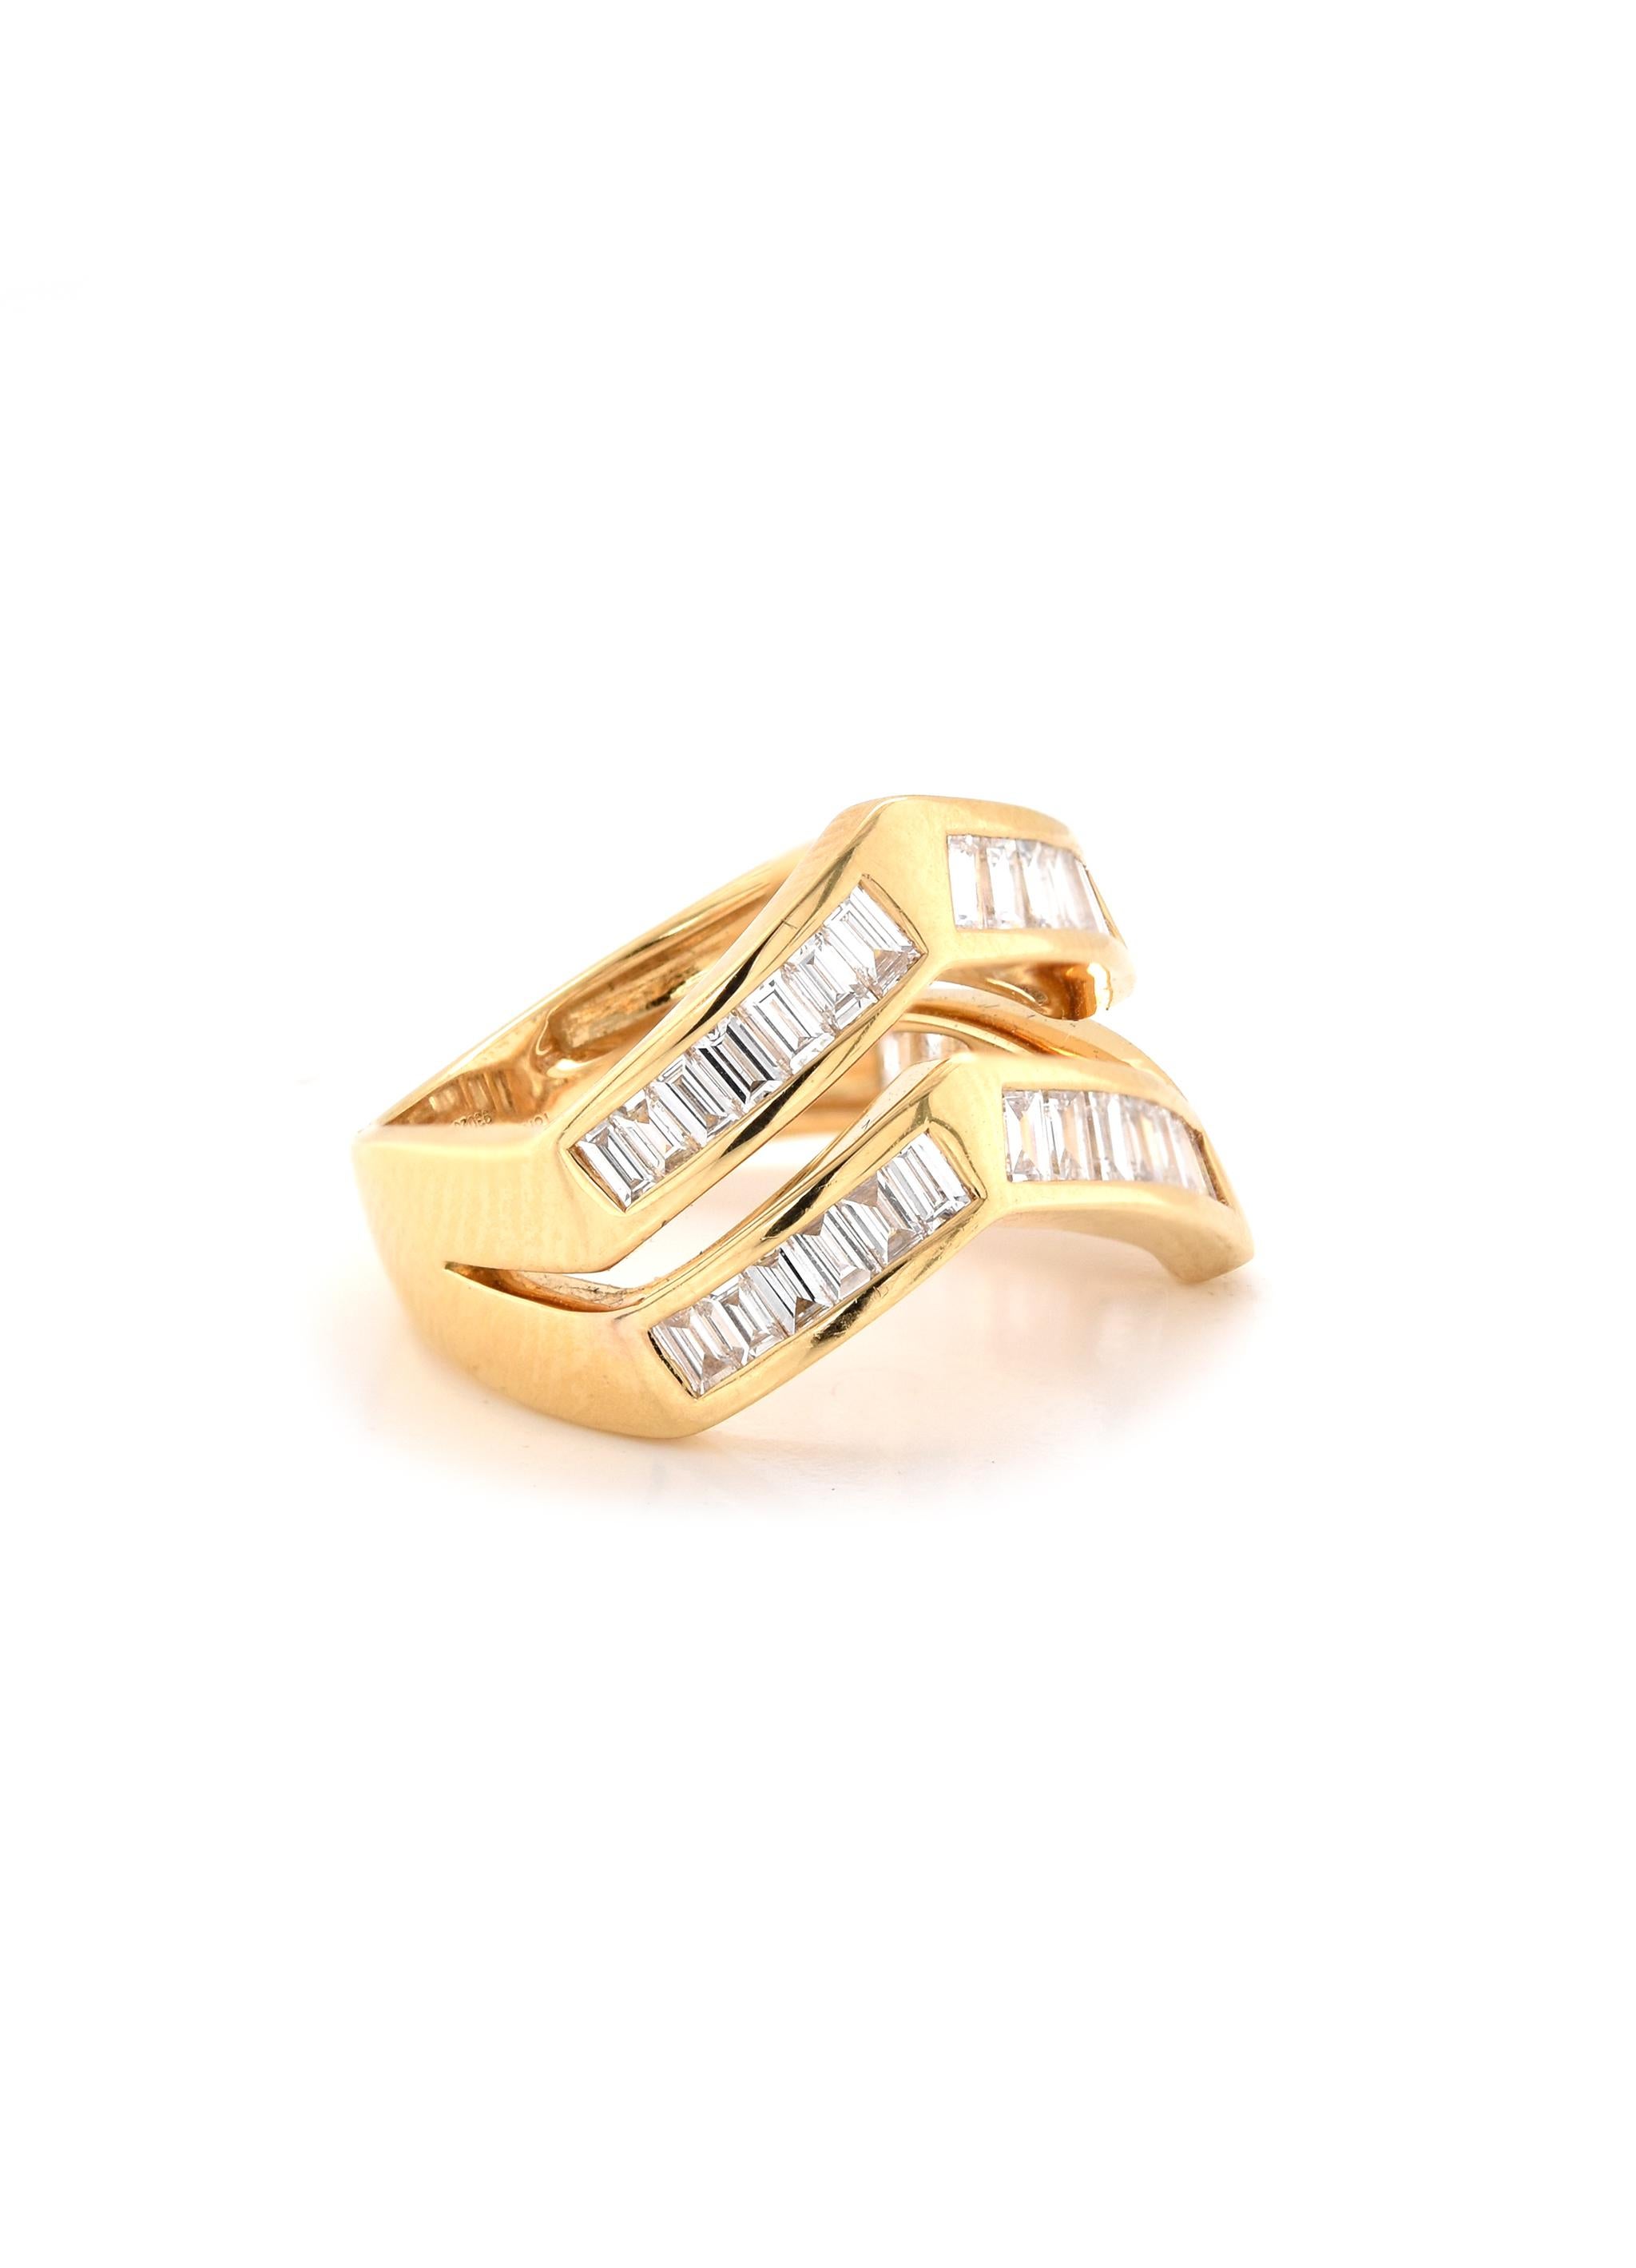 Designer: custom
Material: 18K yellow gold
Diamonds: 41 baguette cut = 1.35cttw
Color: G
Clarity: VS2
Ring size: 6.5 (please allow two additional shipping days for sizing requests)
Weight:  8.12 grams
